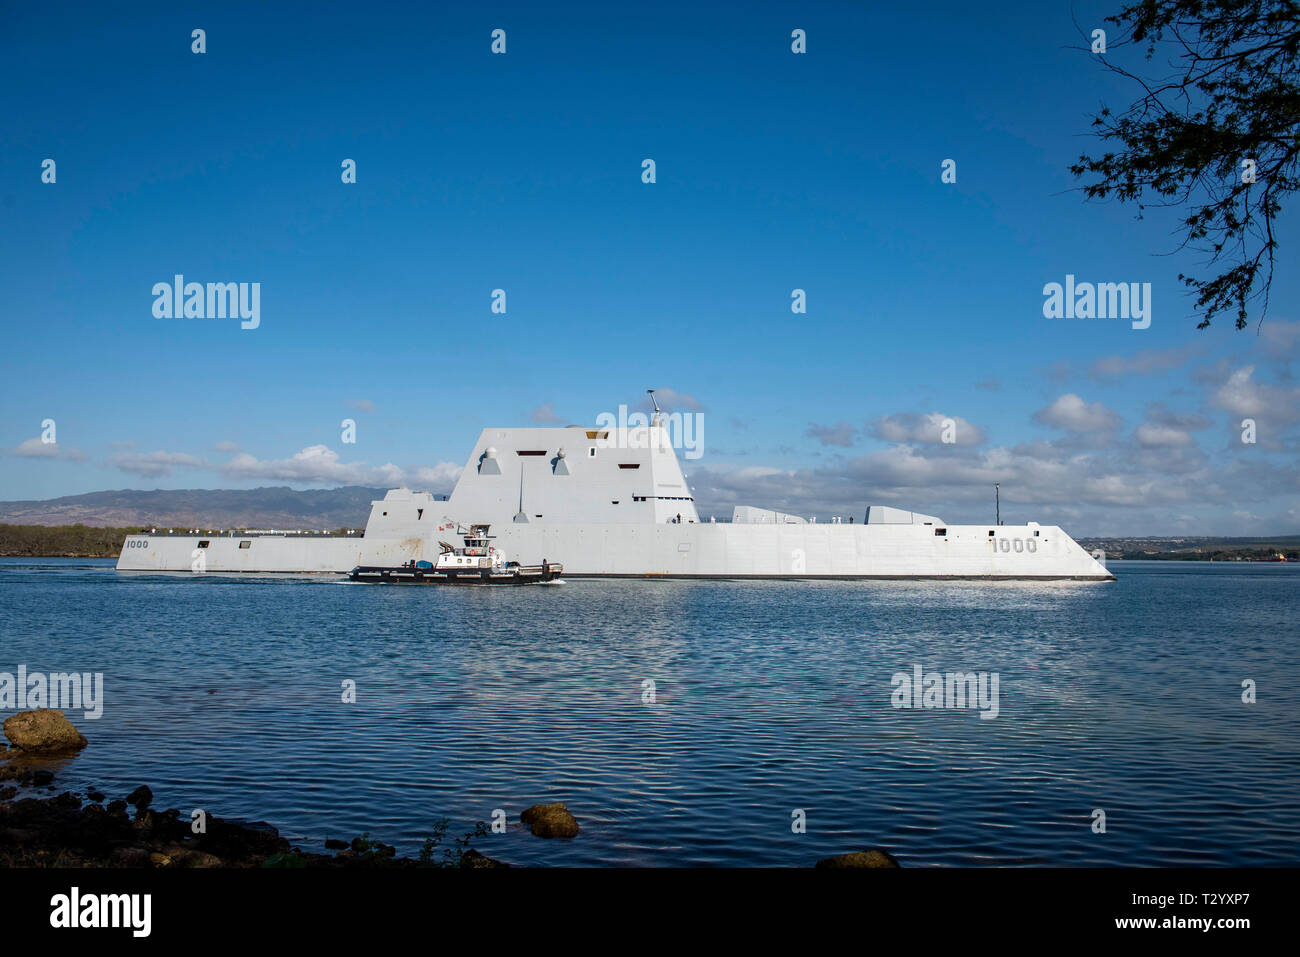 190402-N-SF508-0008 JOINT BASE PEARL HARBOR-HICKAM (April 2, 2019) The lead ship of the U.S. Navy’s newest class of guided-missile destroyers, USS Zumwalt (DDG 1000), arrives in Pearl Harbor. During the scheduled port visit, Zumwalt will conduct engagements with local officials and organizations. Zumwalt is under operational control of U.S. 3rd Fleet. Third Fleet leads all naval forces in the Pacific and provides the realistic, relevant training necessary for an effective global Navy. Third Fleet coordinates with U.S. 7th Fleet to plan and execute missions based on their complementary strength Stock Photo